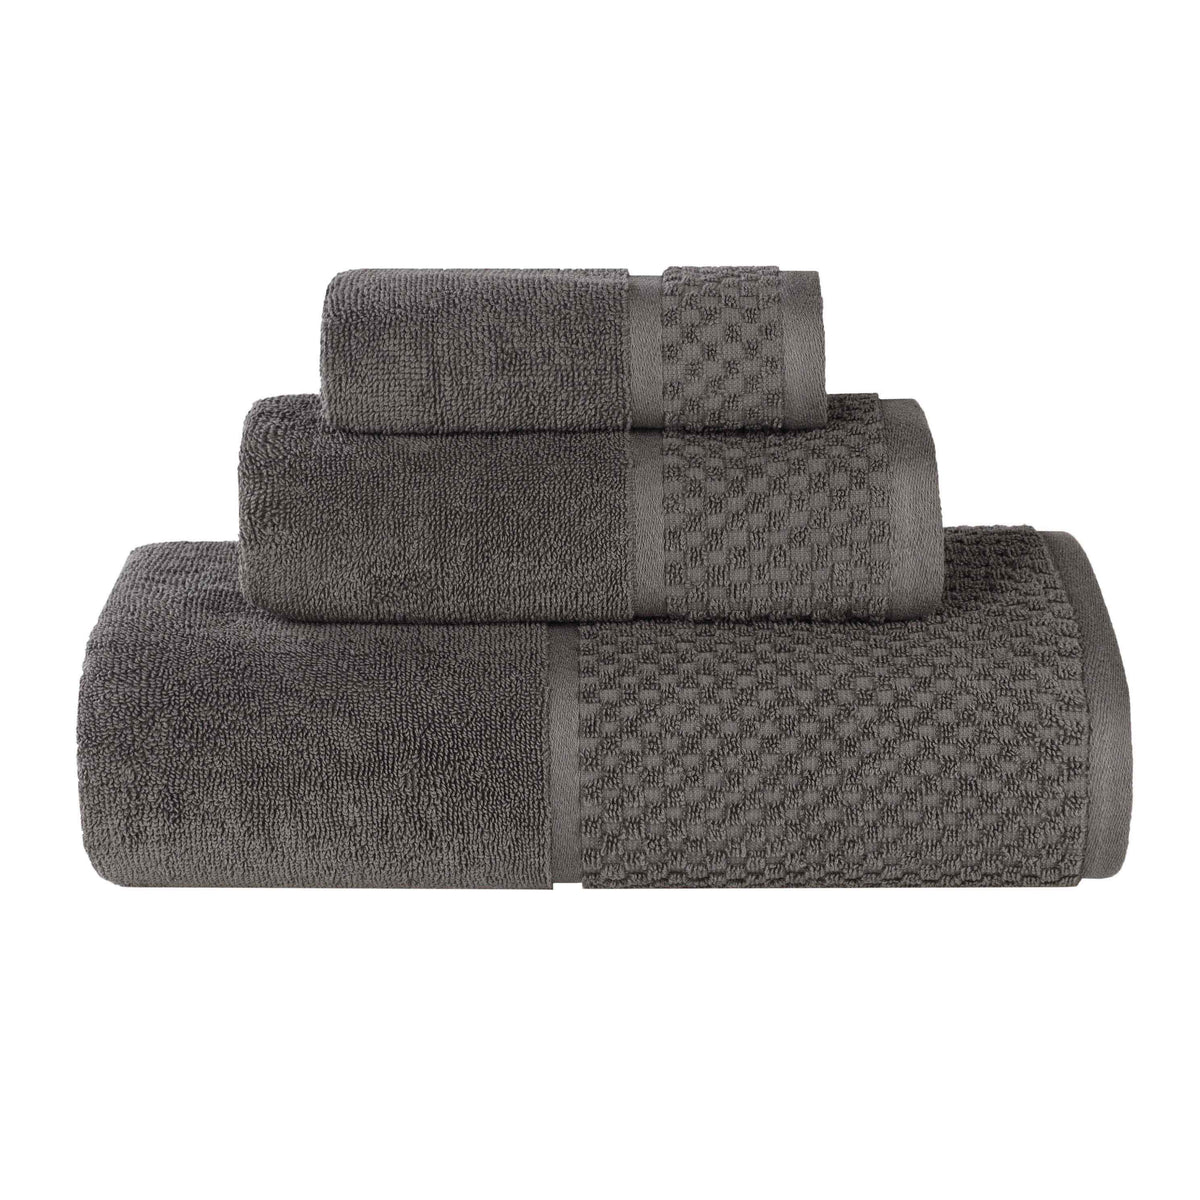 Lodie Cotton Plush Absorbent Jacquard Solid 3 Piece Assorted Towel Set - Charcoal-Ivory